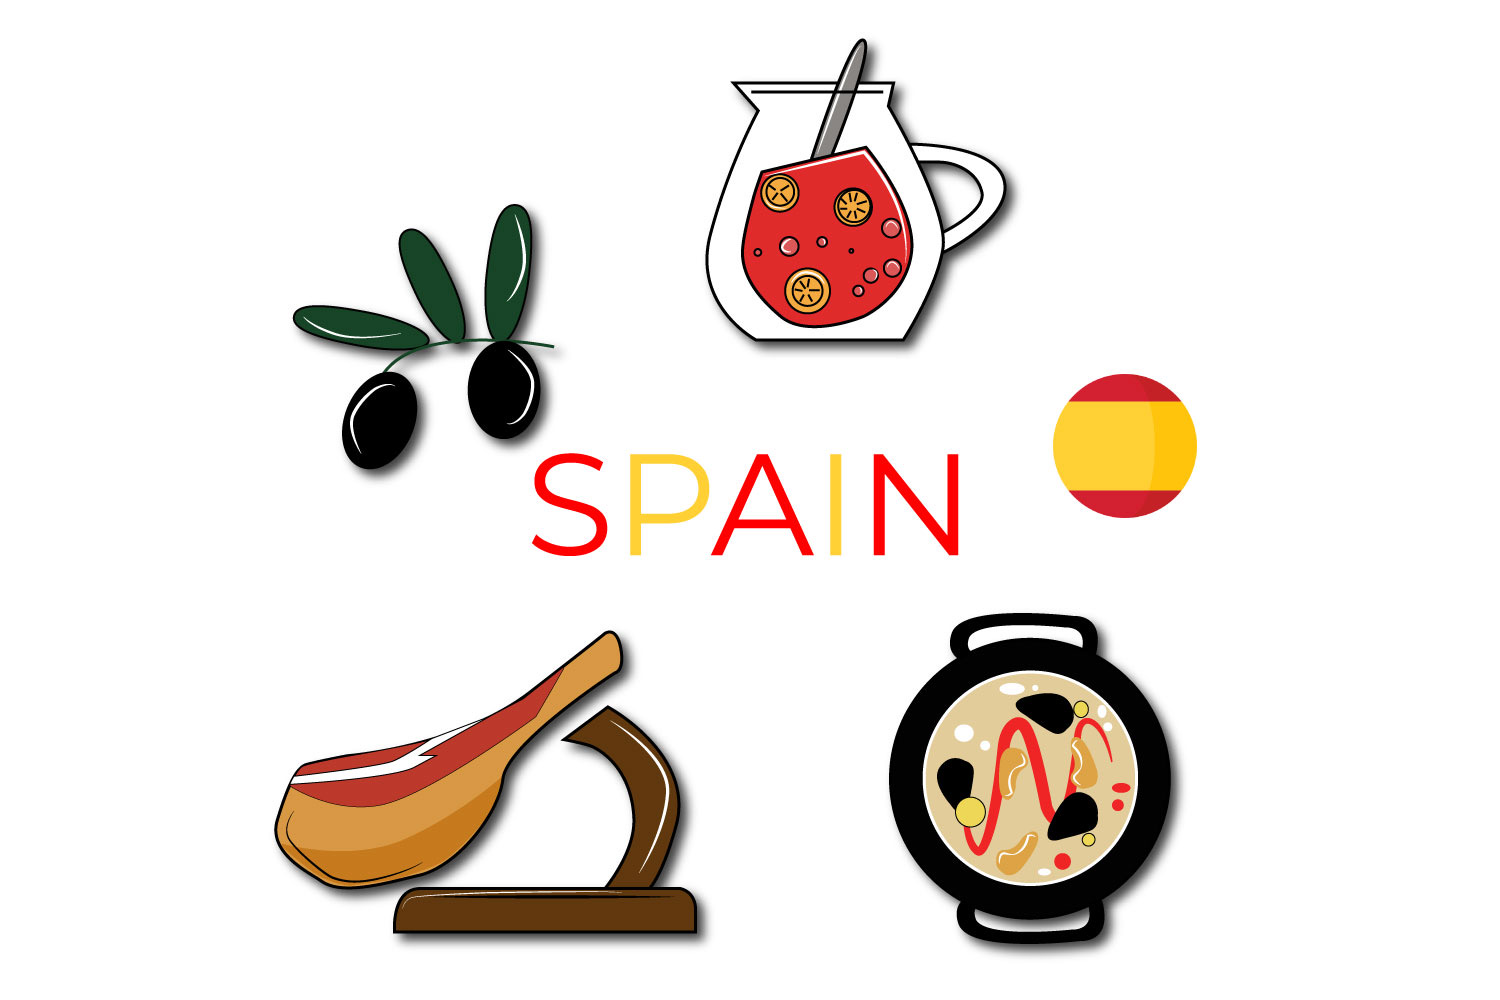 Spain and Spanish objects pinterest preview image.